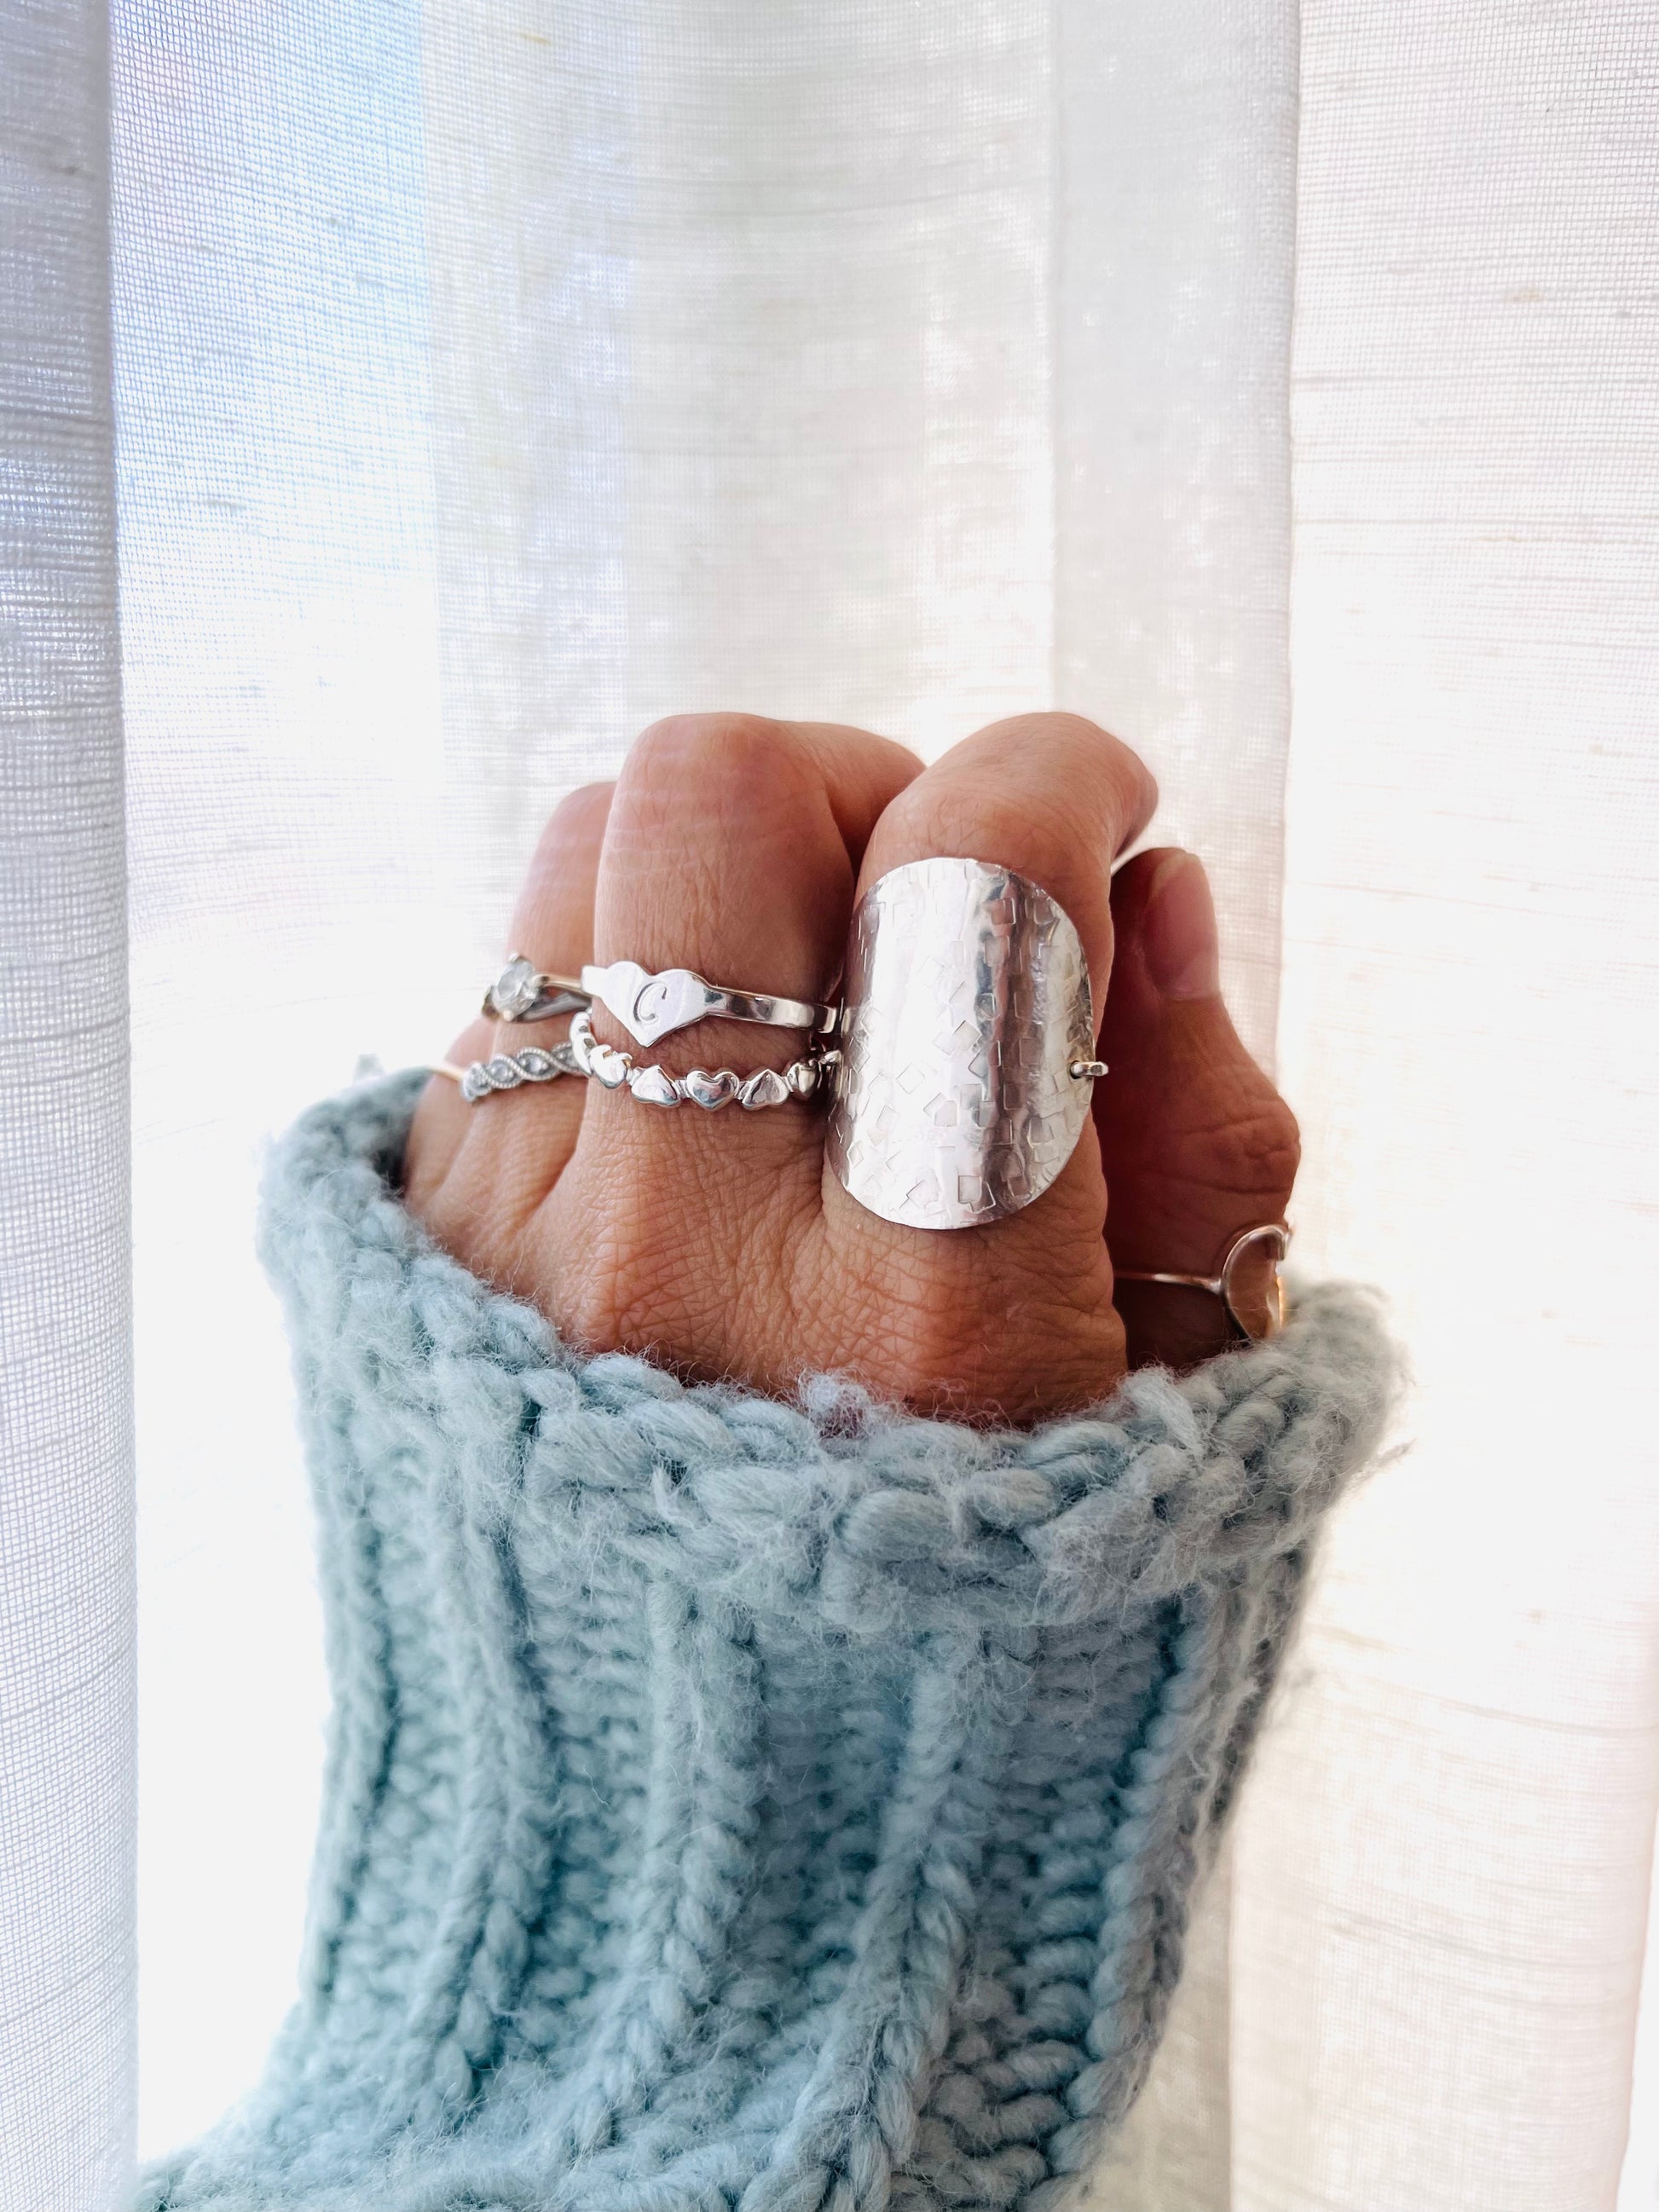 Crafted from high-quality sterling silver, this large disc ring is perfect for everyday wear. With its subtle hammered texture, the ring gives a unique, delicate touch to any stackable or statement ring set. Perfect for minimalist everyday jewelry.